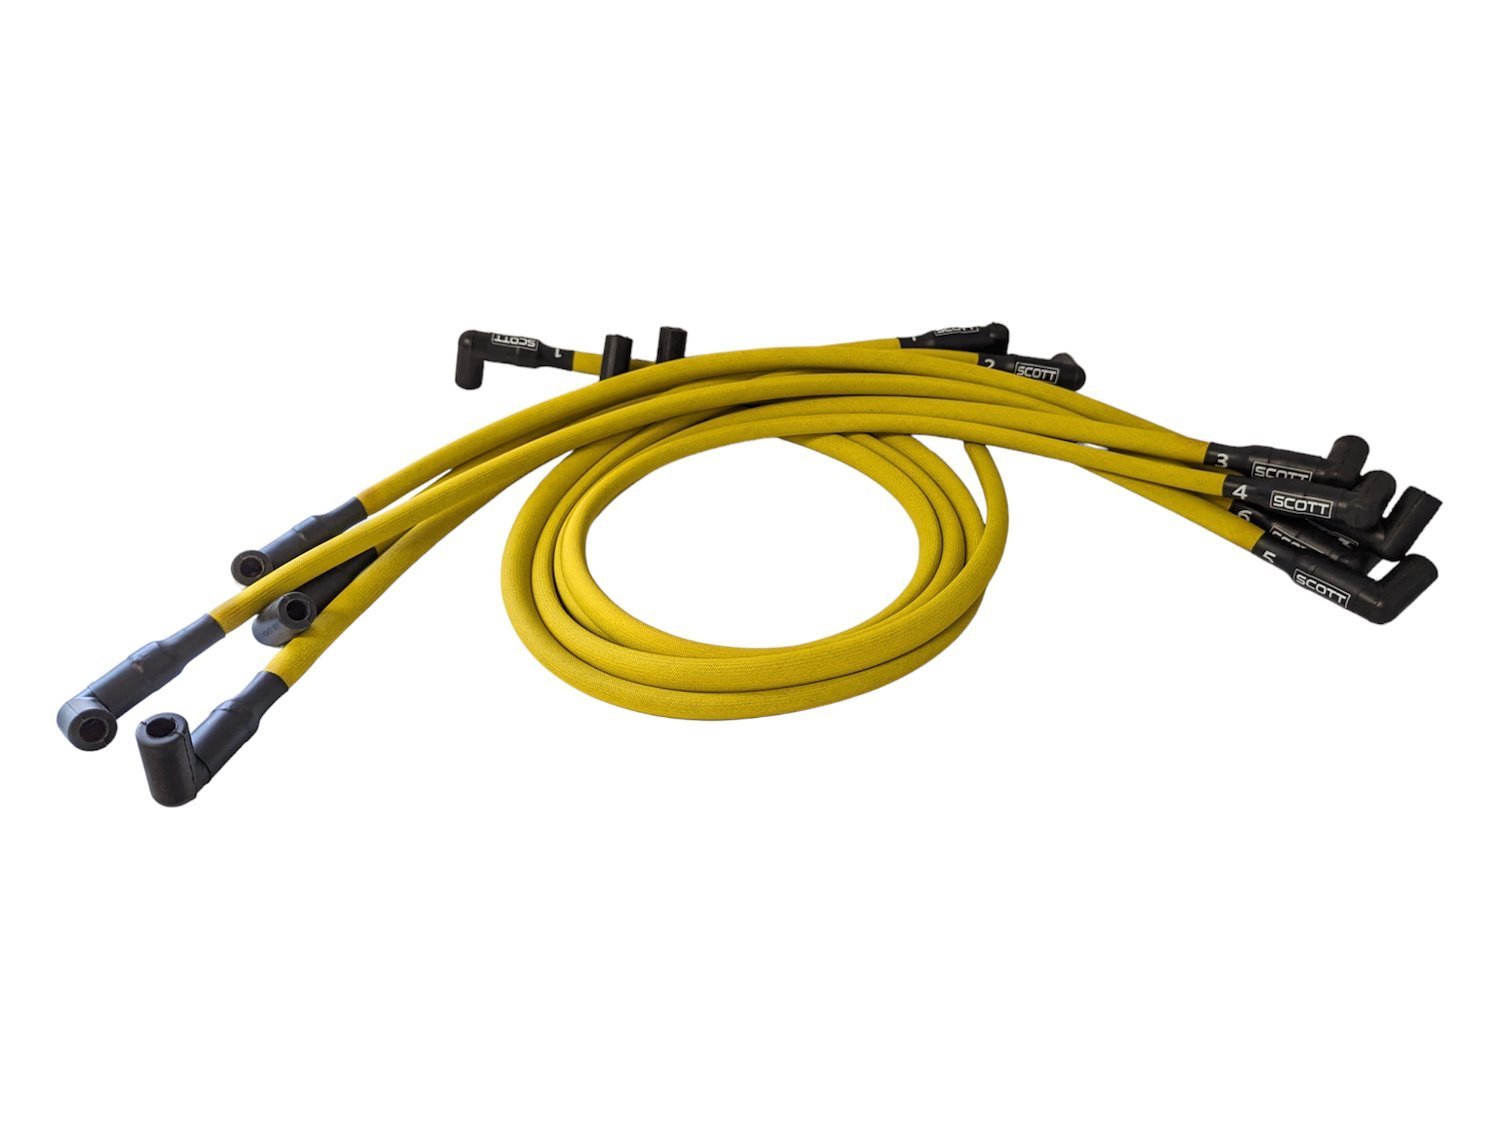 SPW-PS-430-5 High-Performance Fiberglass-Oversleeved Spark Plug Wire Set for Big Block Ford, Under Header [Yellow]